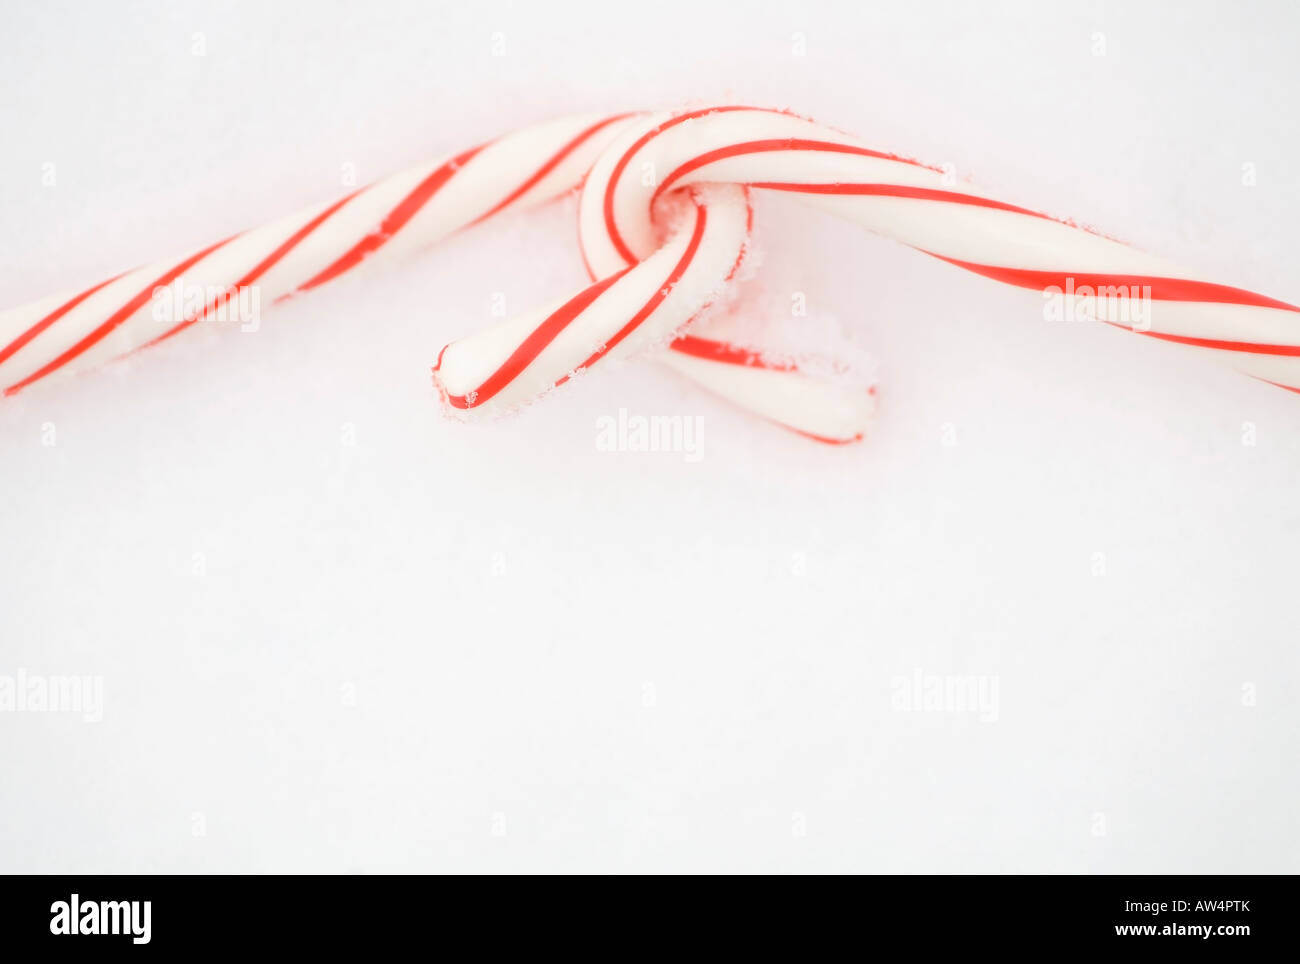 Two candy canes in the snow Stock Photo